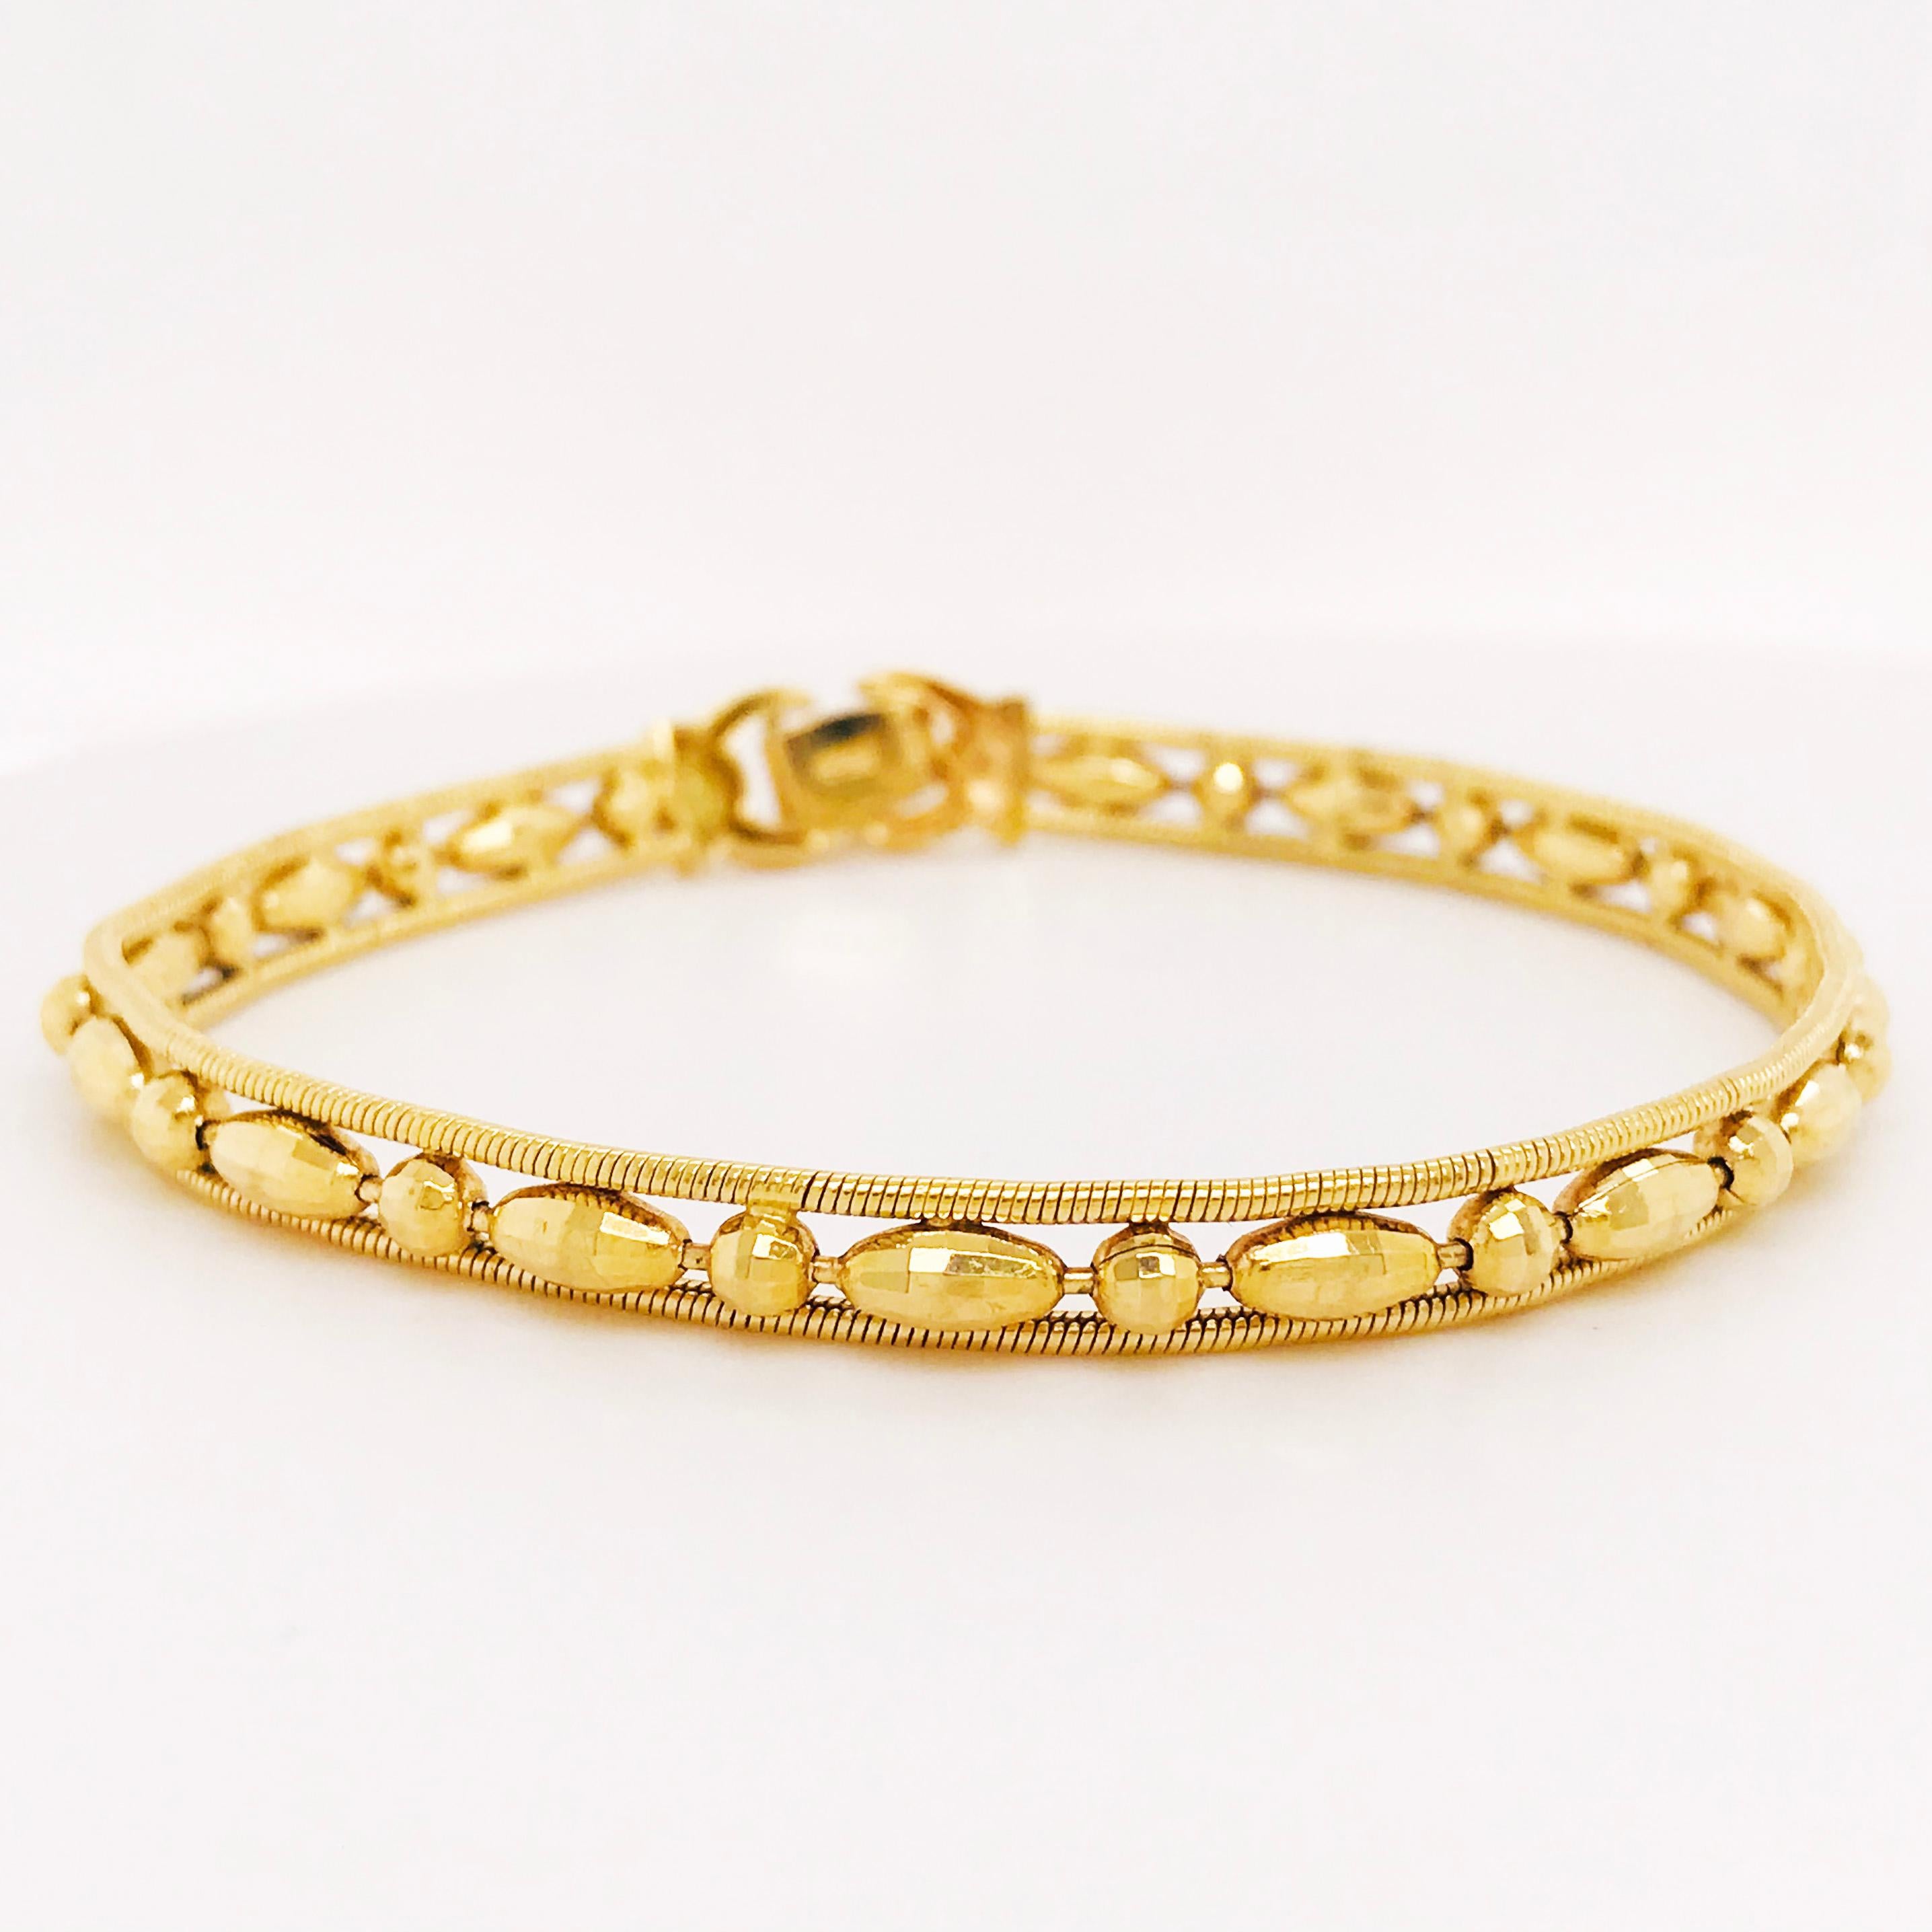 This 18 karat yellow gold diamond cut beaded bracelet is such a fun piece! With unique, hand made beads going all the way around that have each been individually made with a 